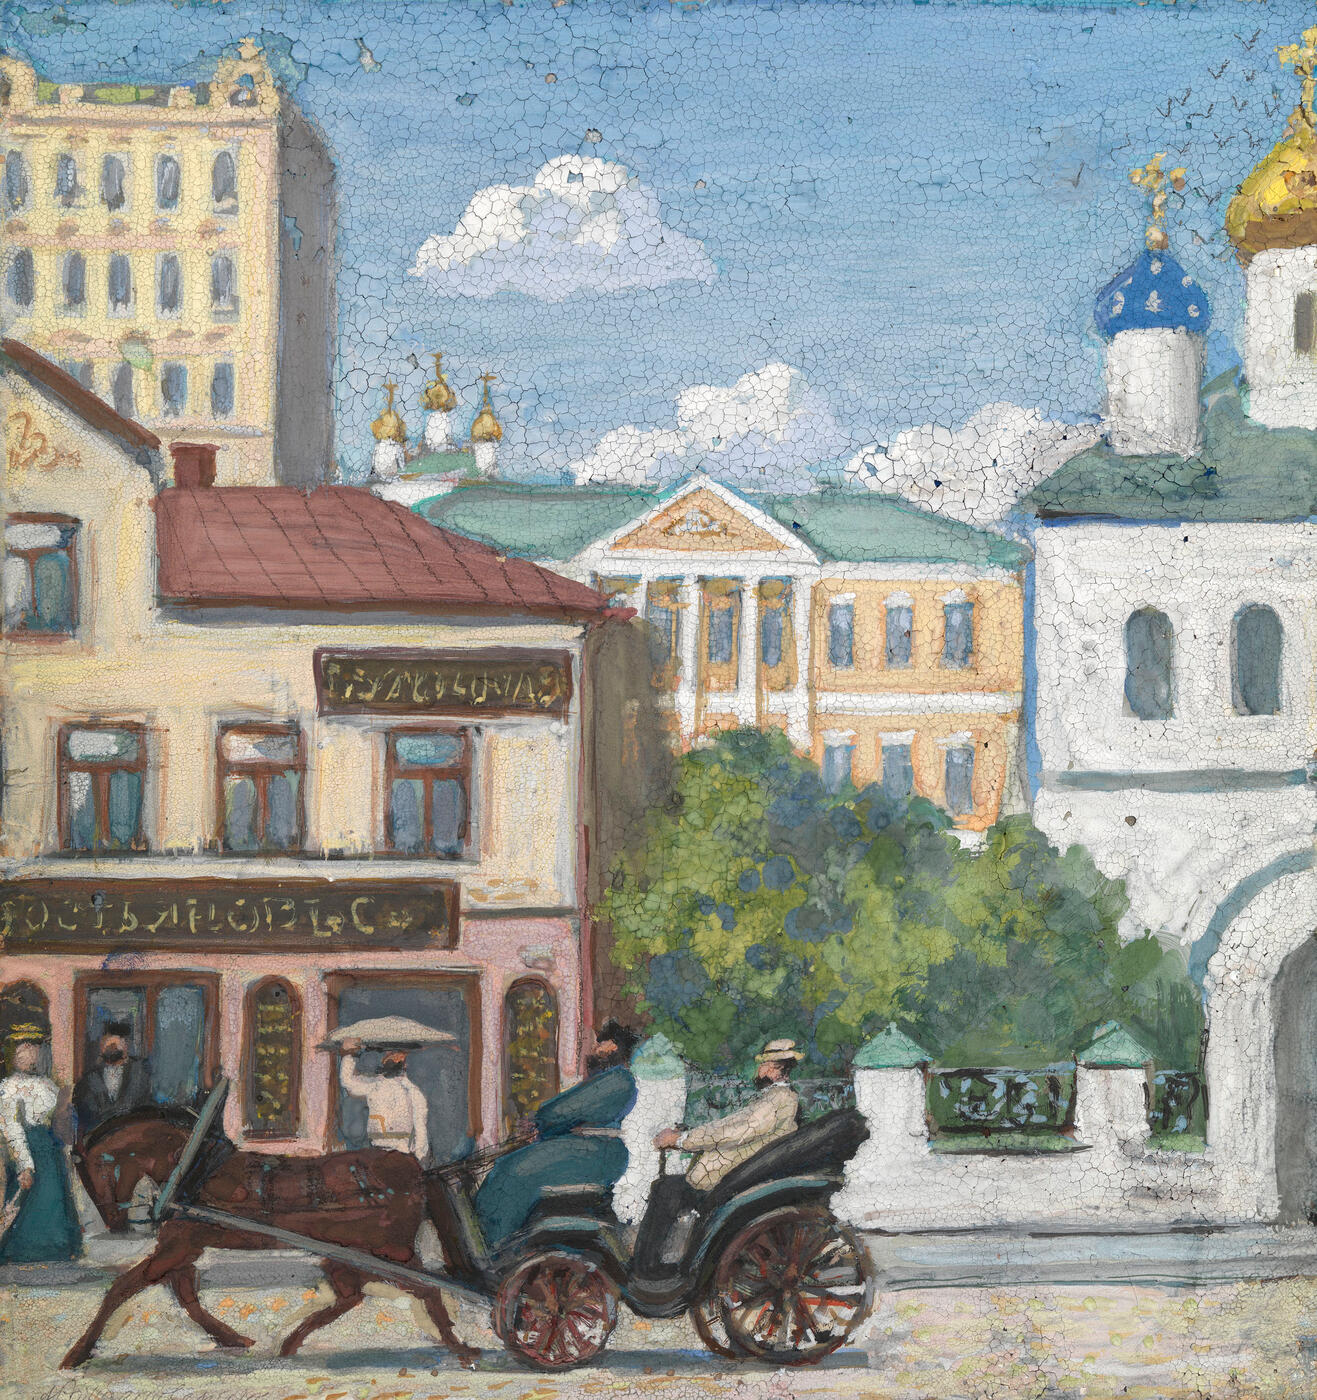 Old Moscow